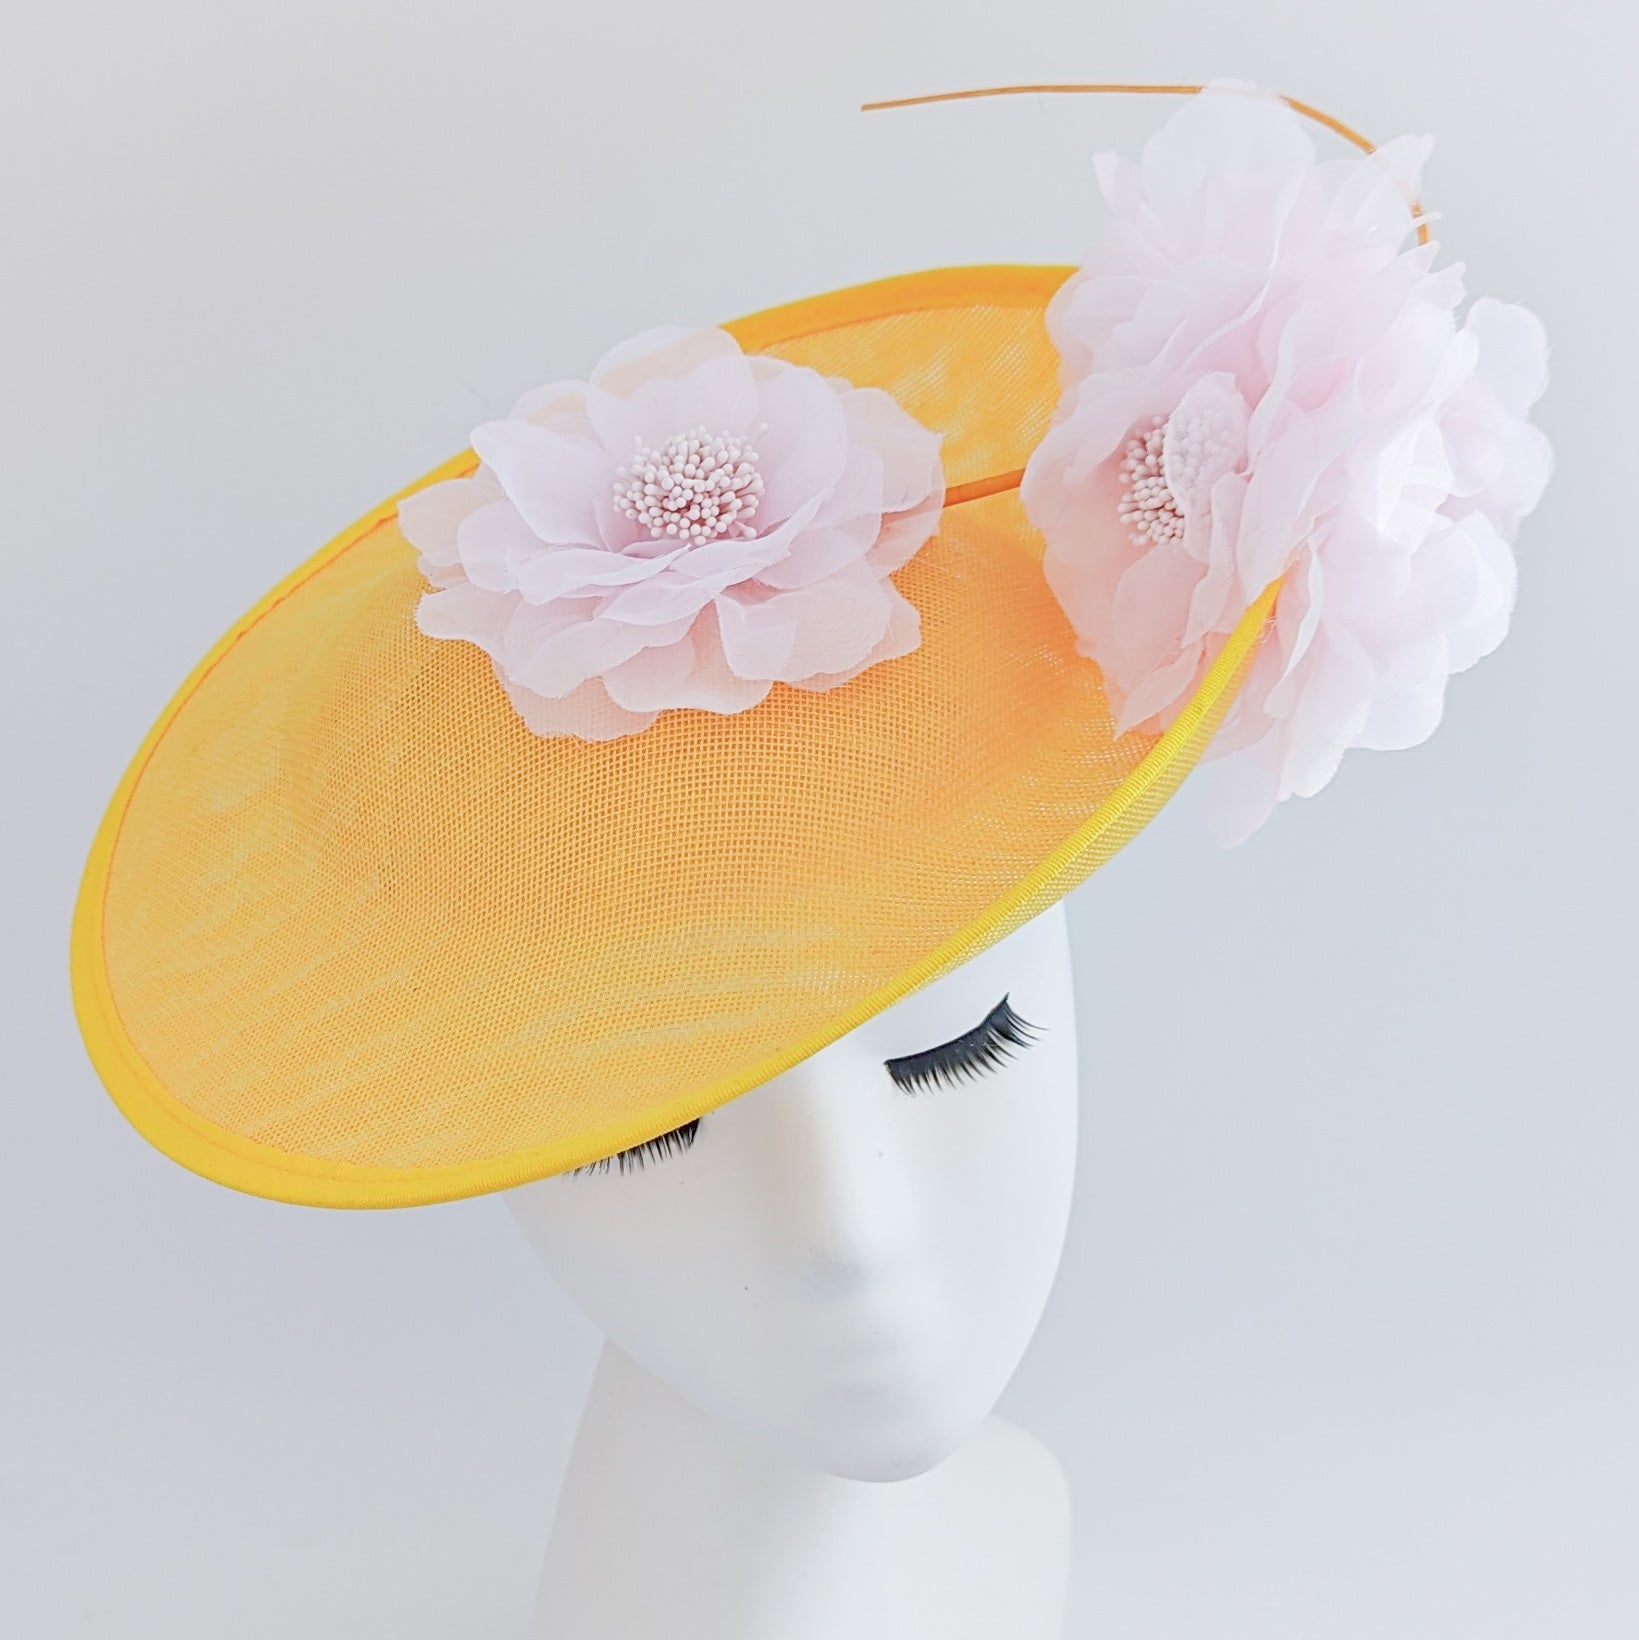 Yellow and pink large flower saucer disc fascinator hat